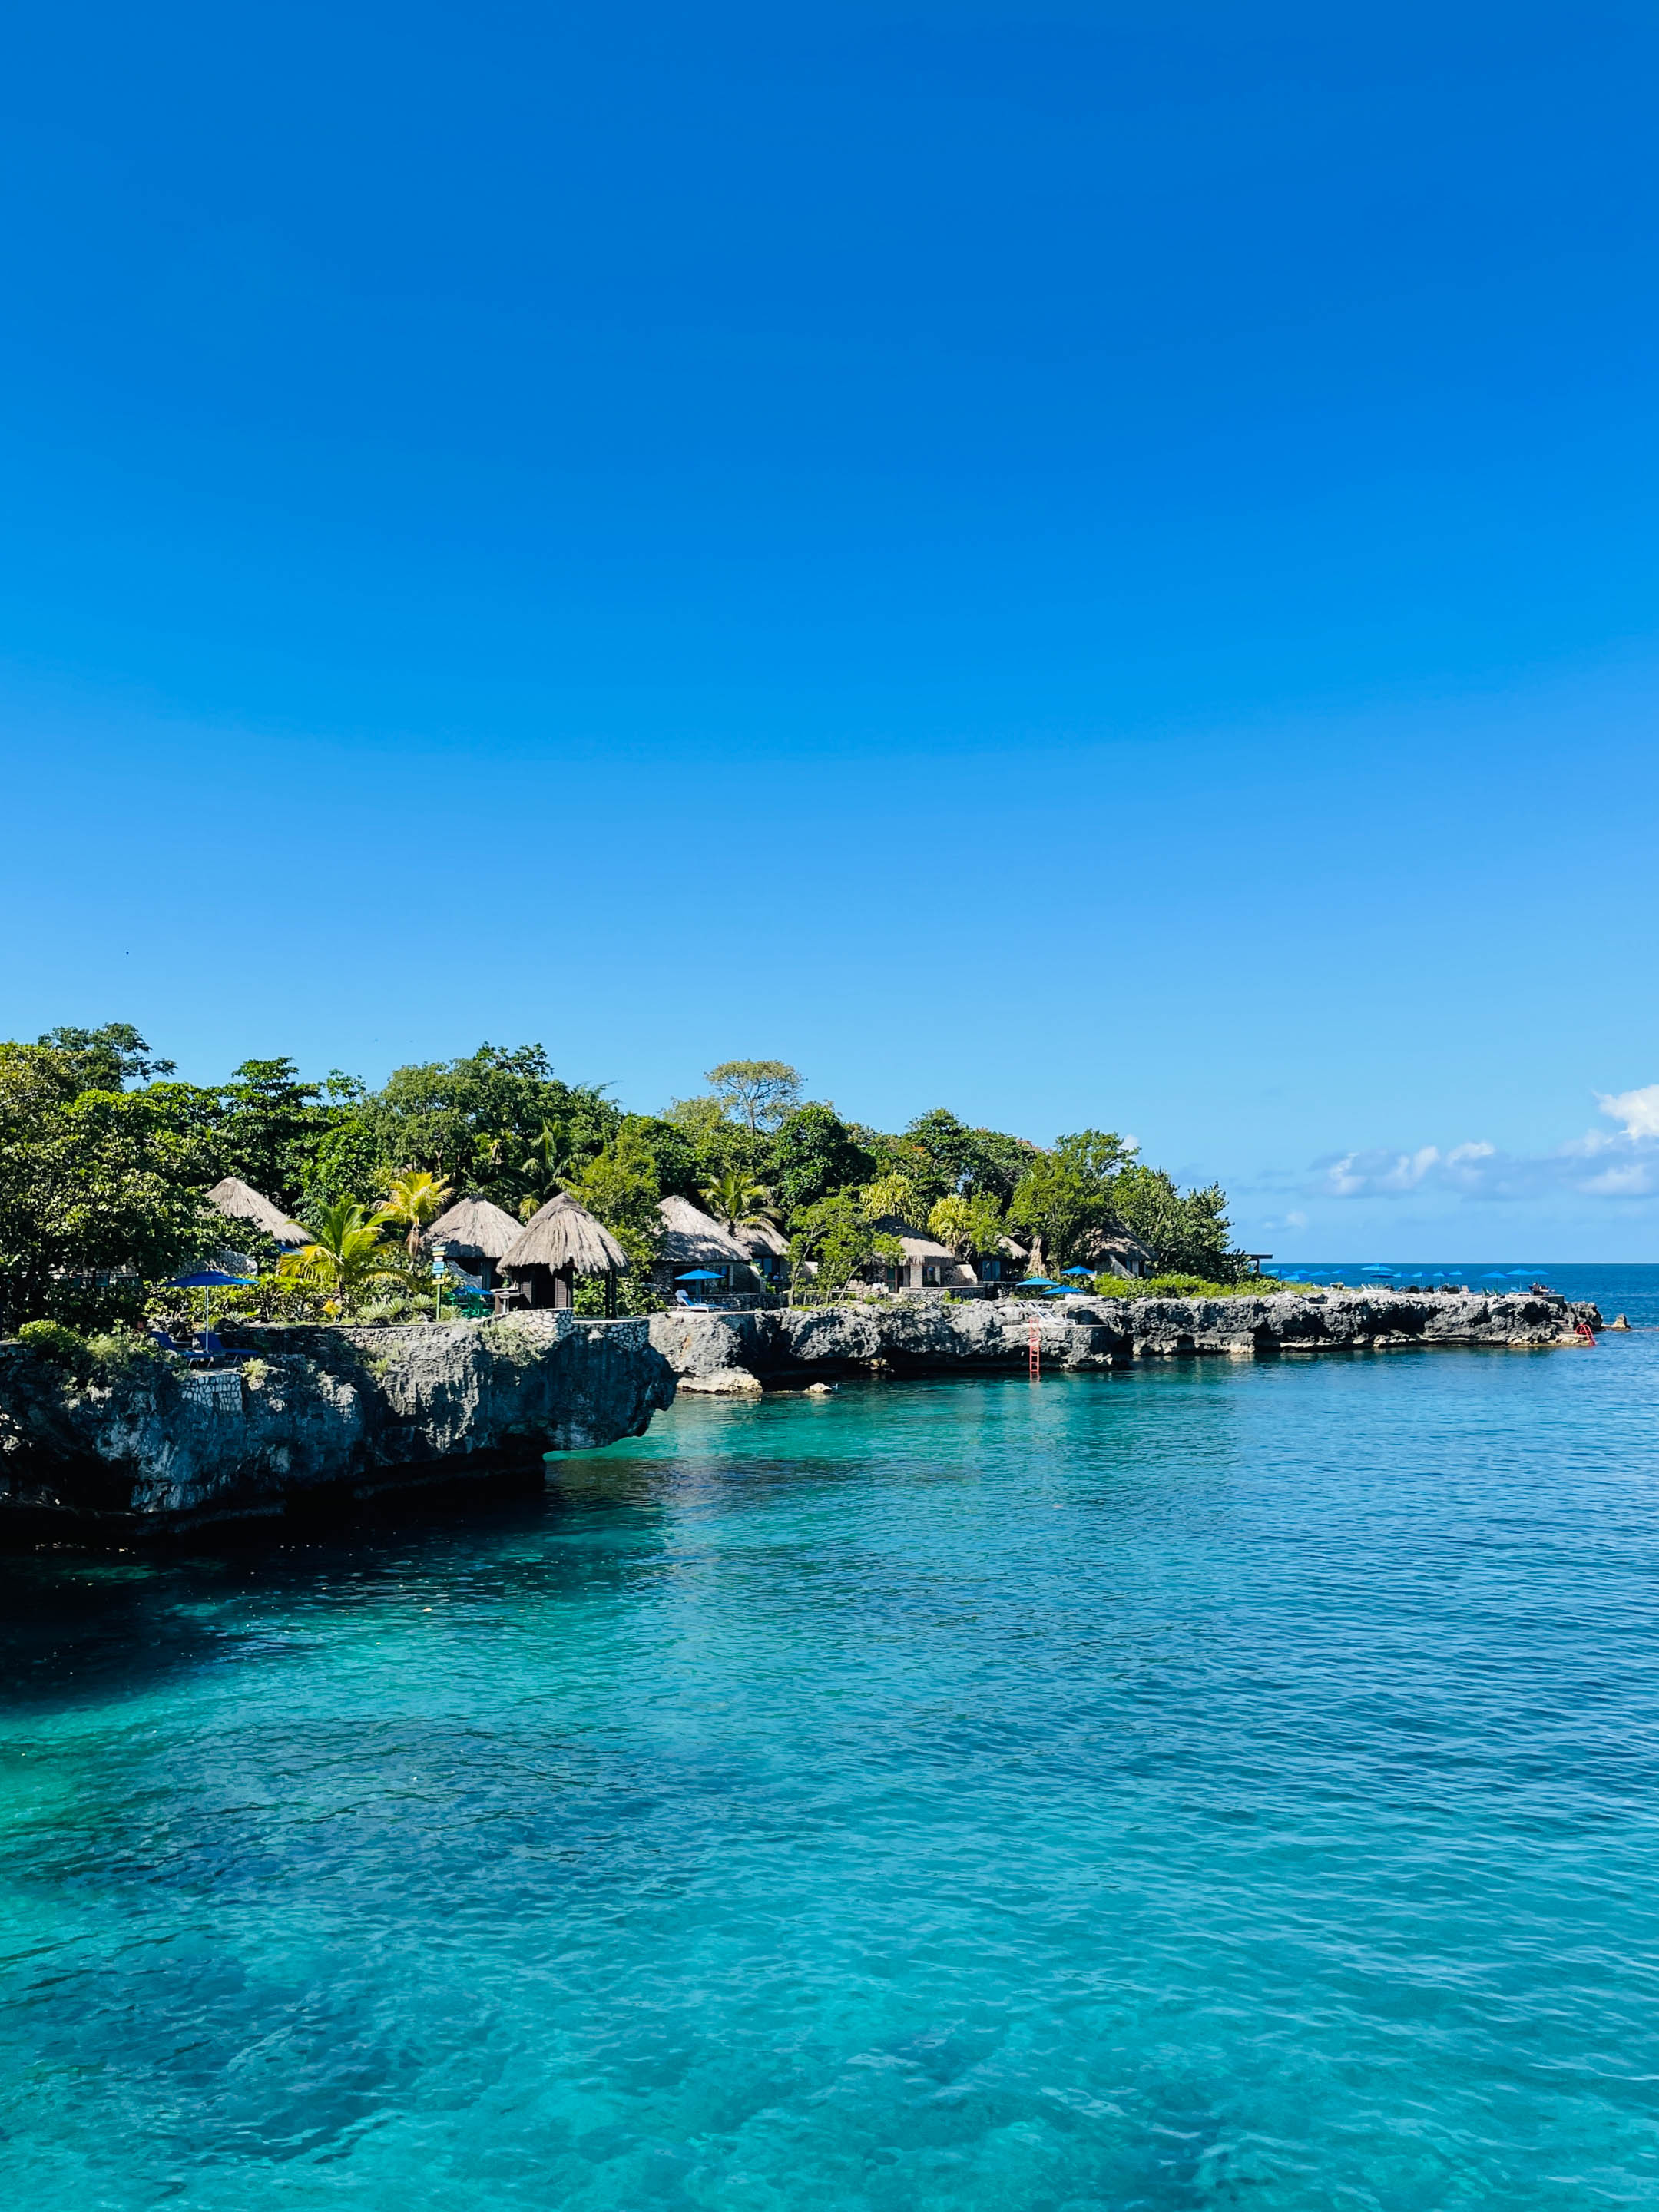 Travel and Lifestyle Photographer - The Rock House Negril Resort